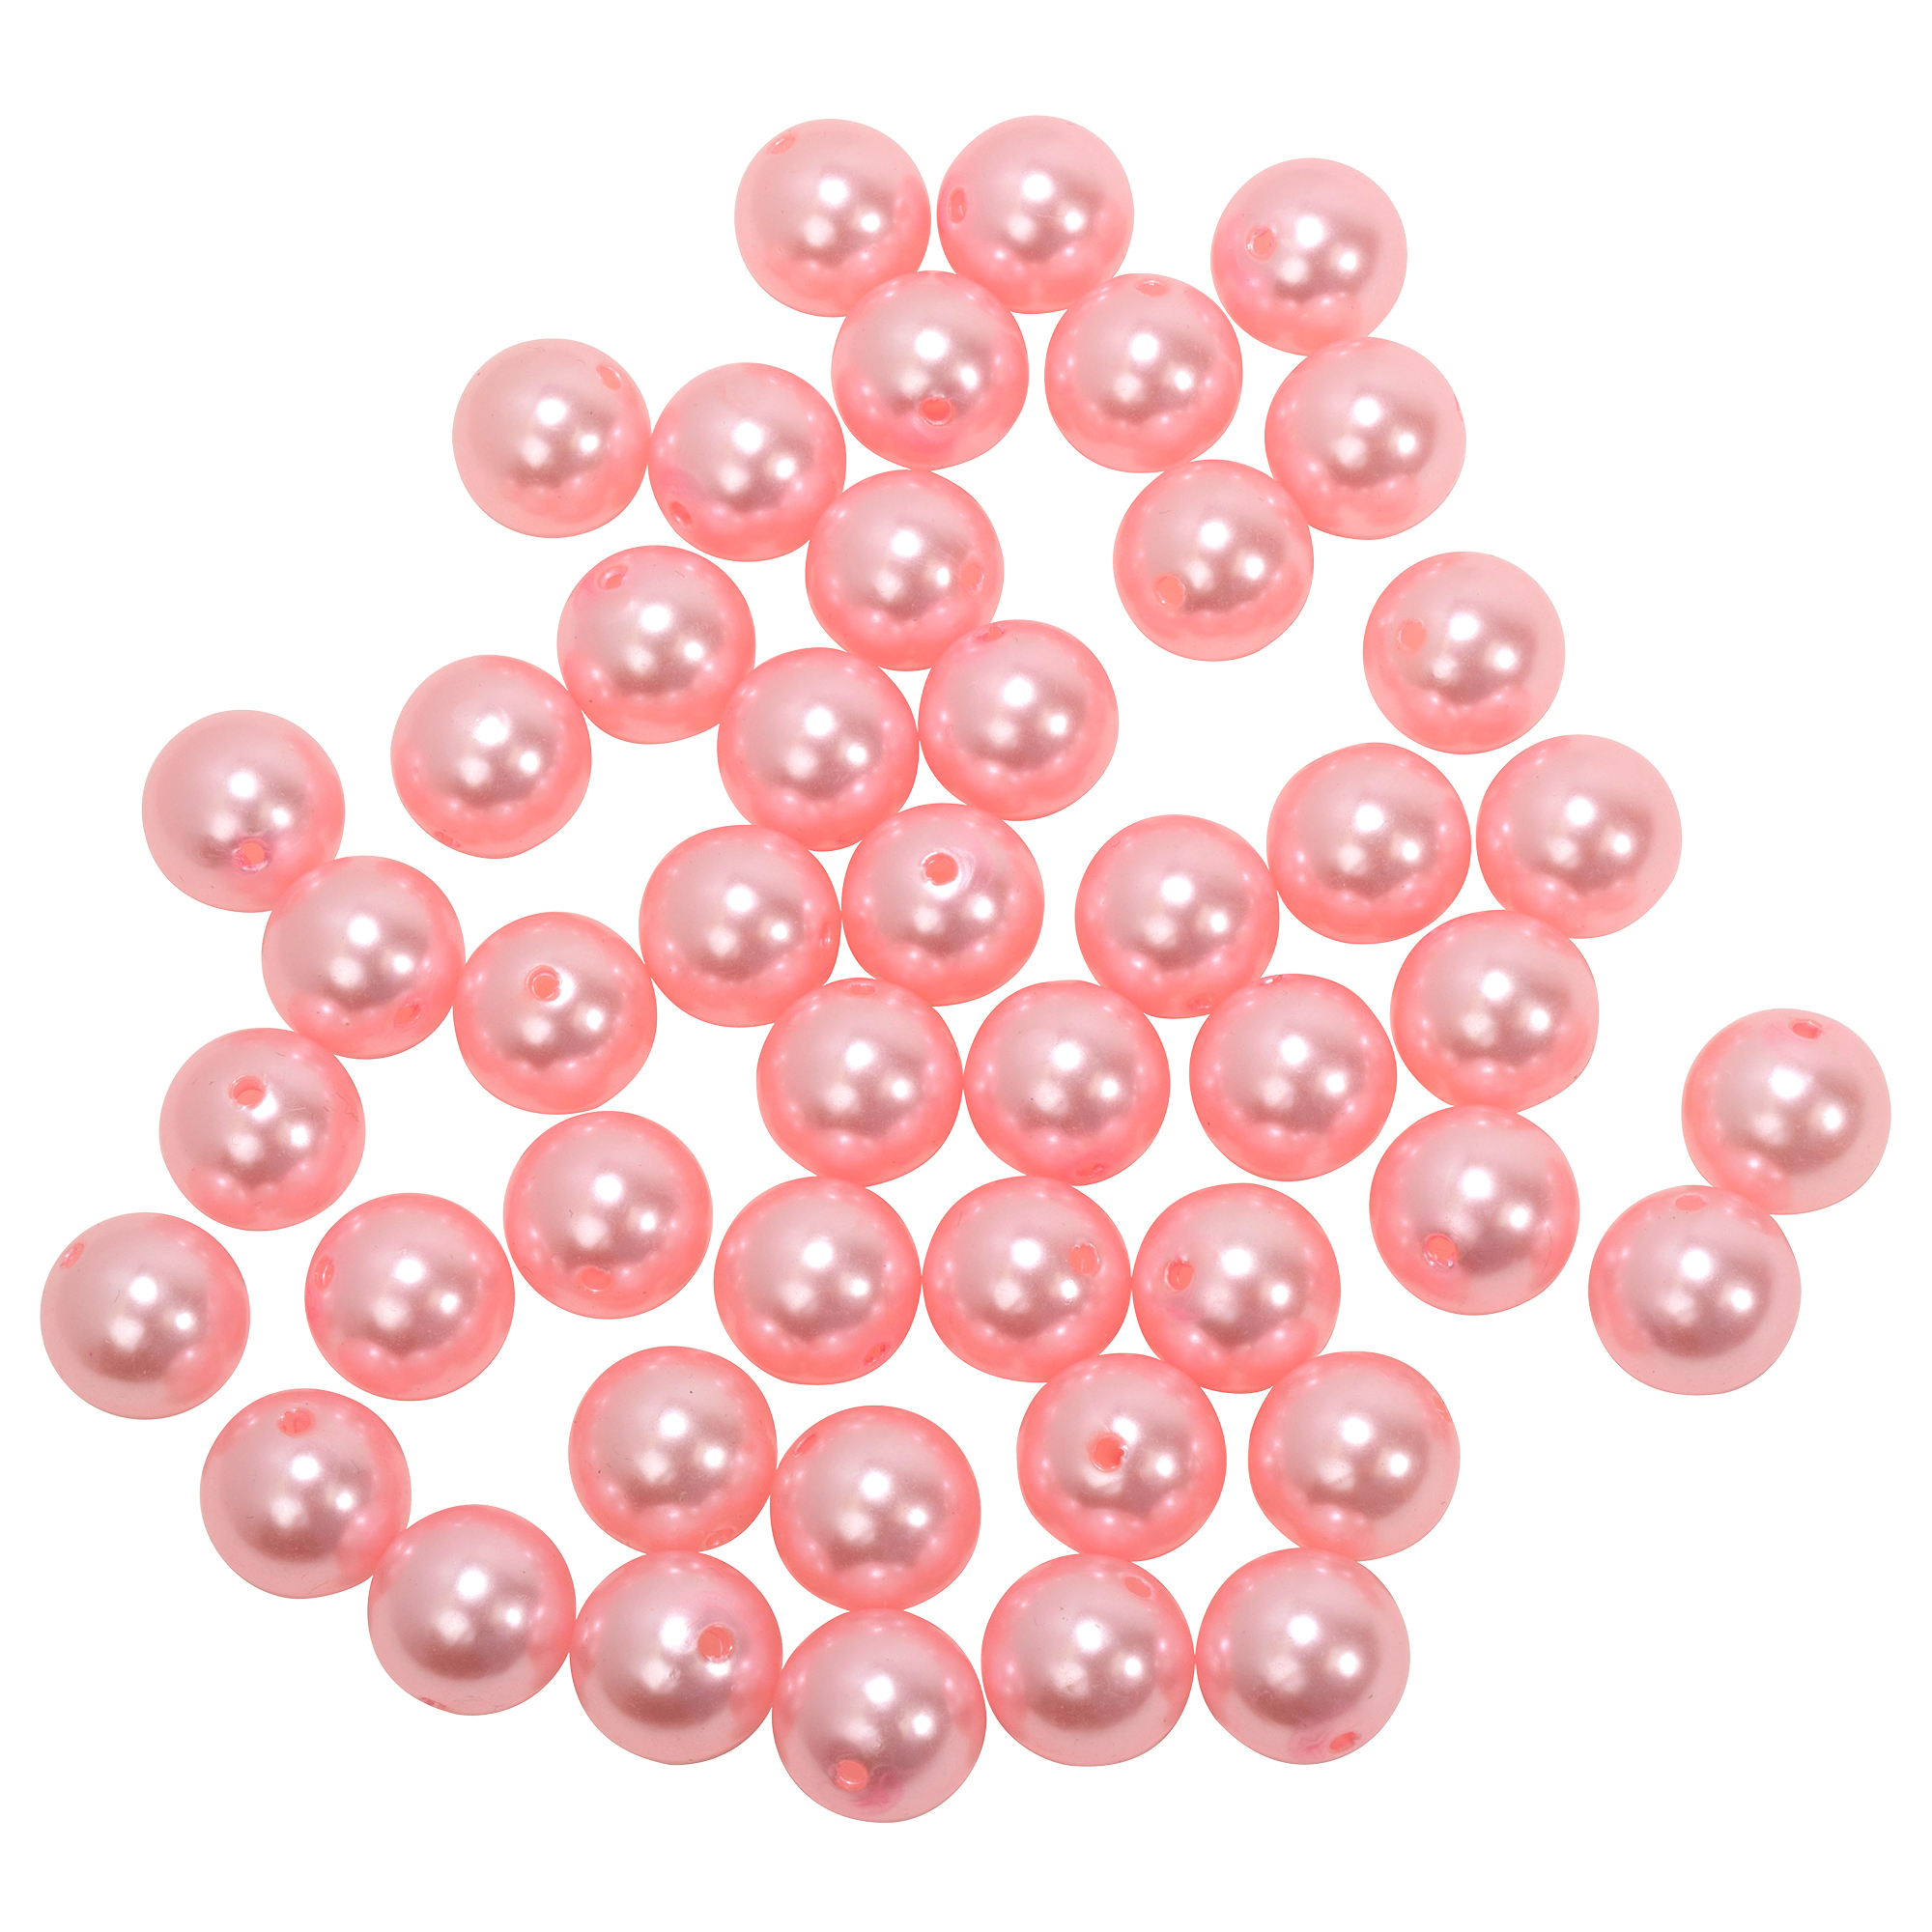 20mm Craft Pearl Beads With Hole 454g/Bag - Pink